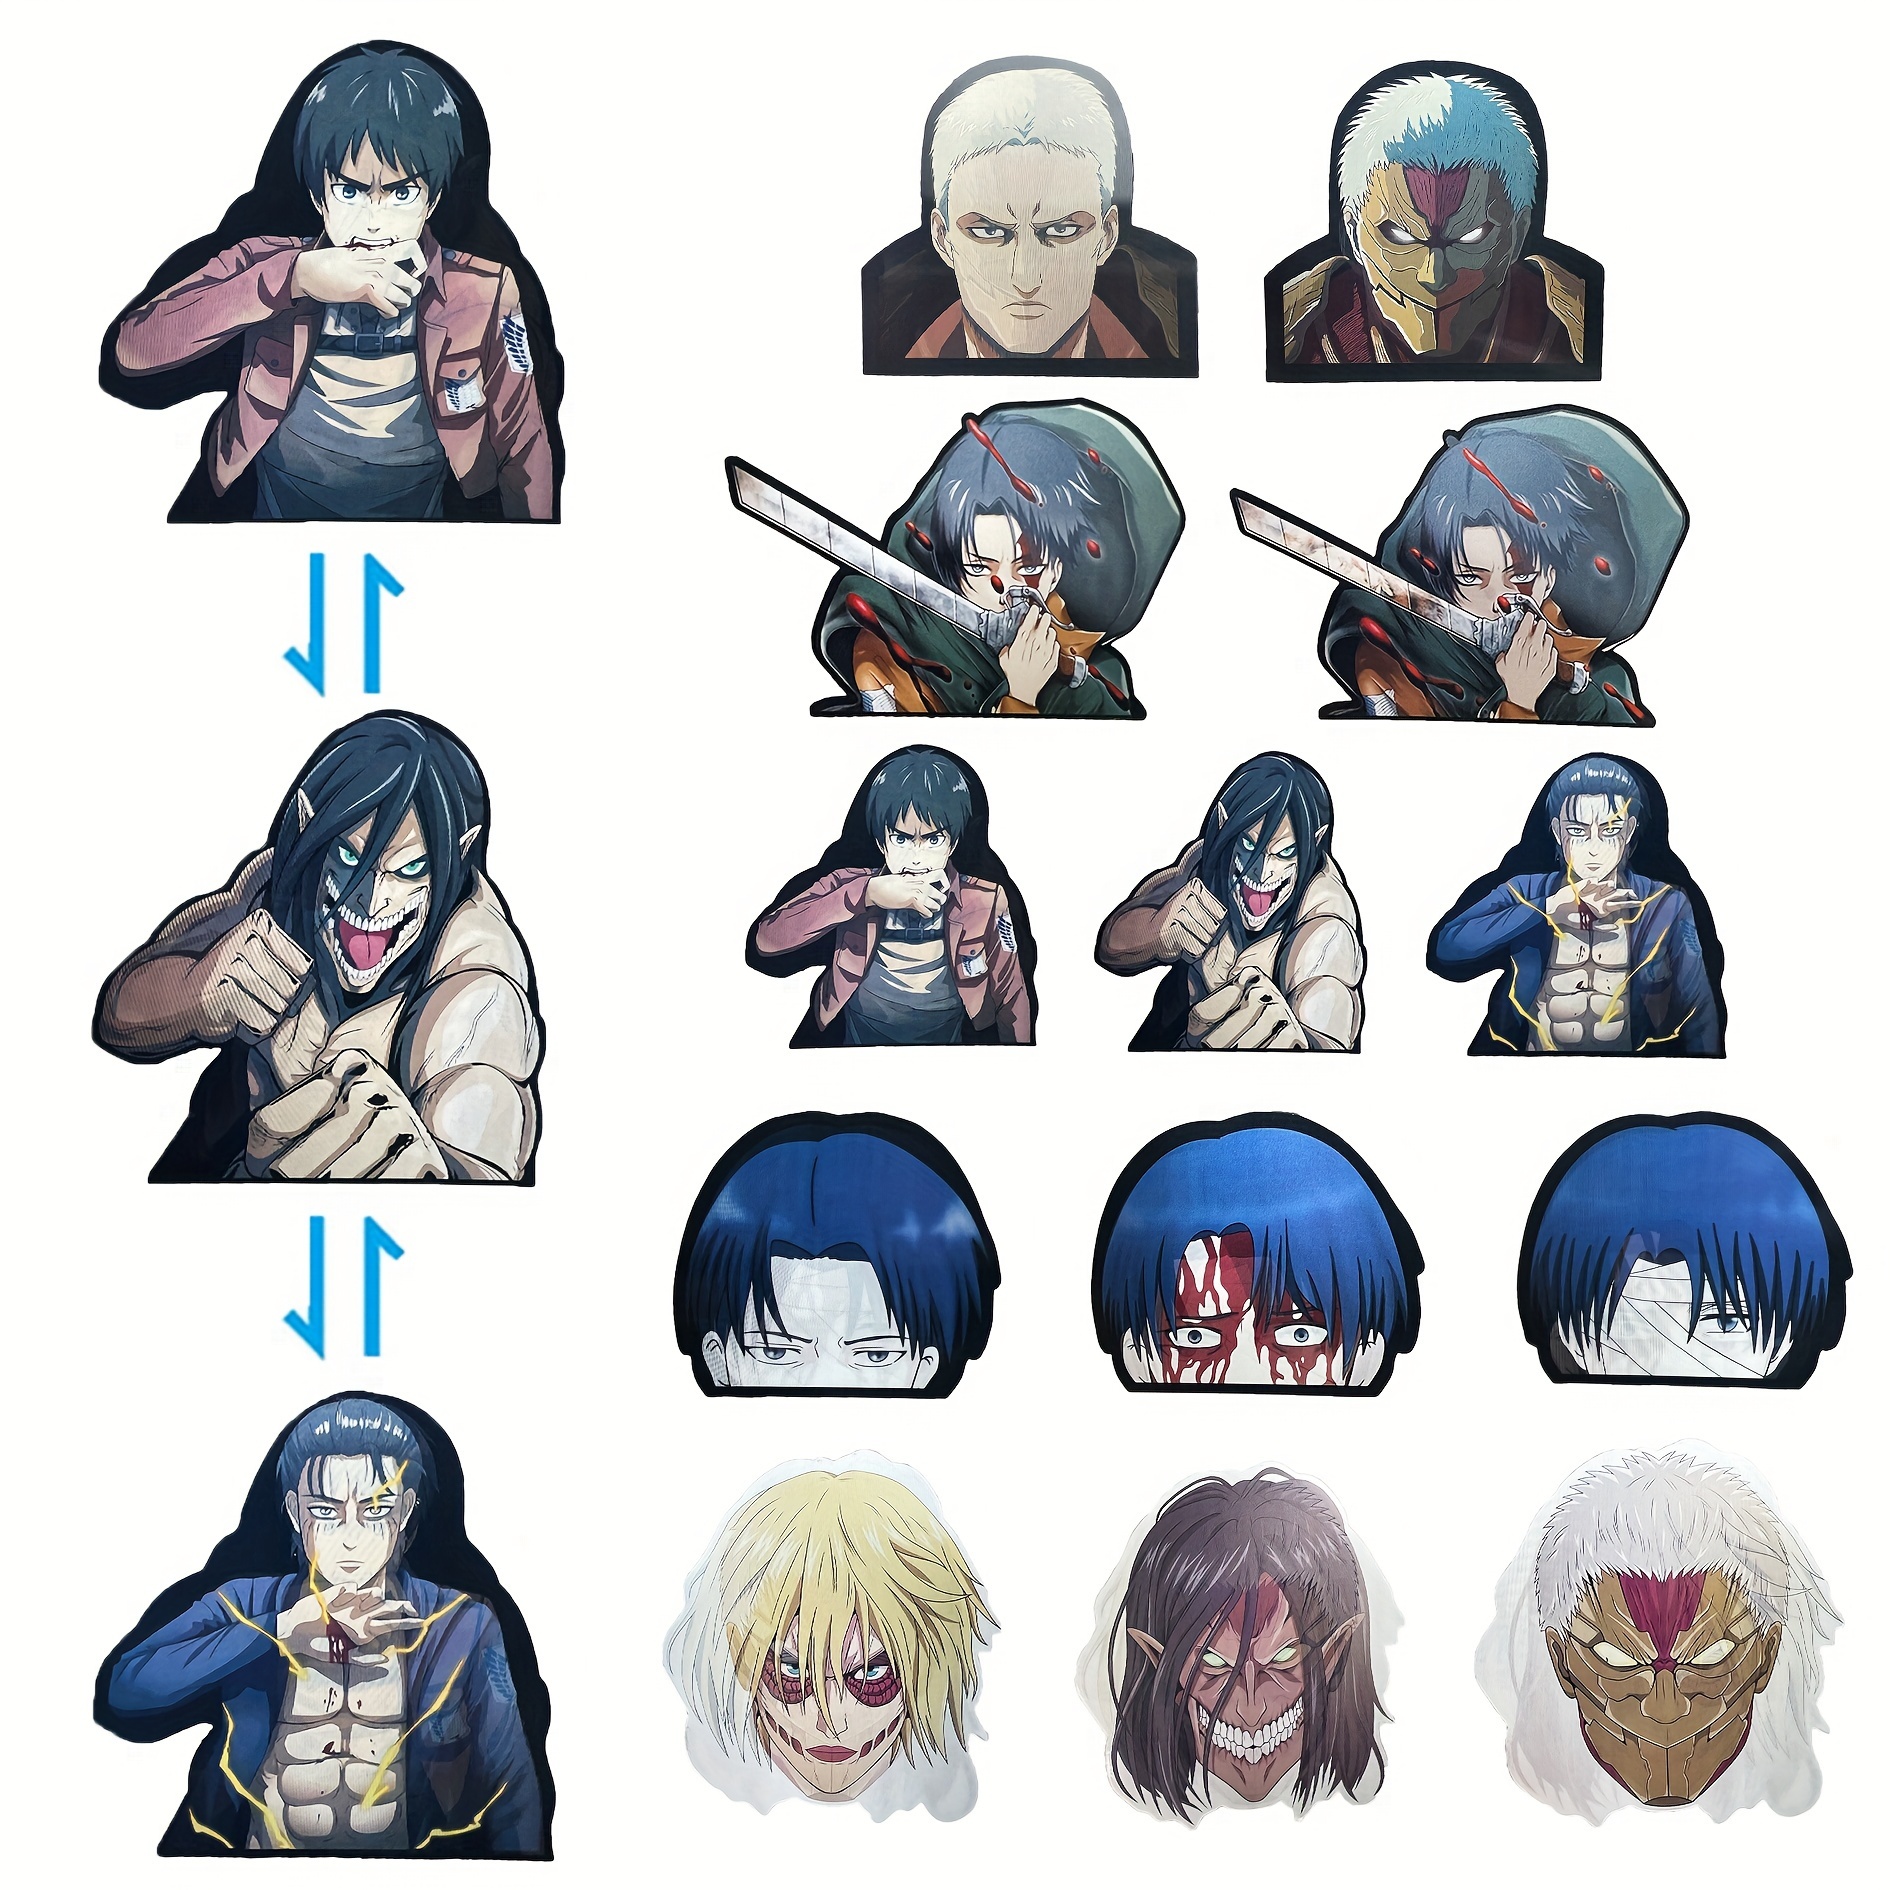 100pcs Attack On Titan Stickers Latest Anime Aot Sticker Pack Cool Japanese  Stickers For Water Bottles, Laptop, Skateboard, Gift For Adults Kids Teens